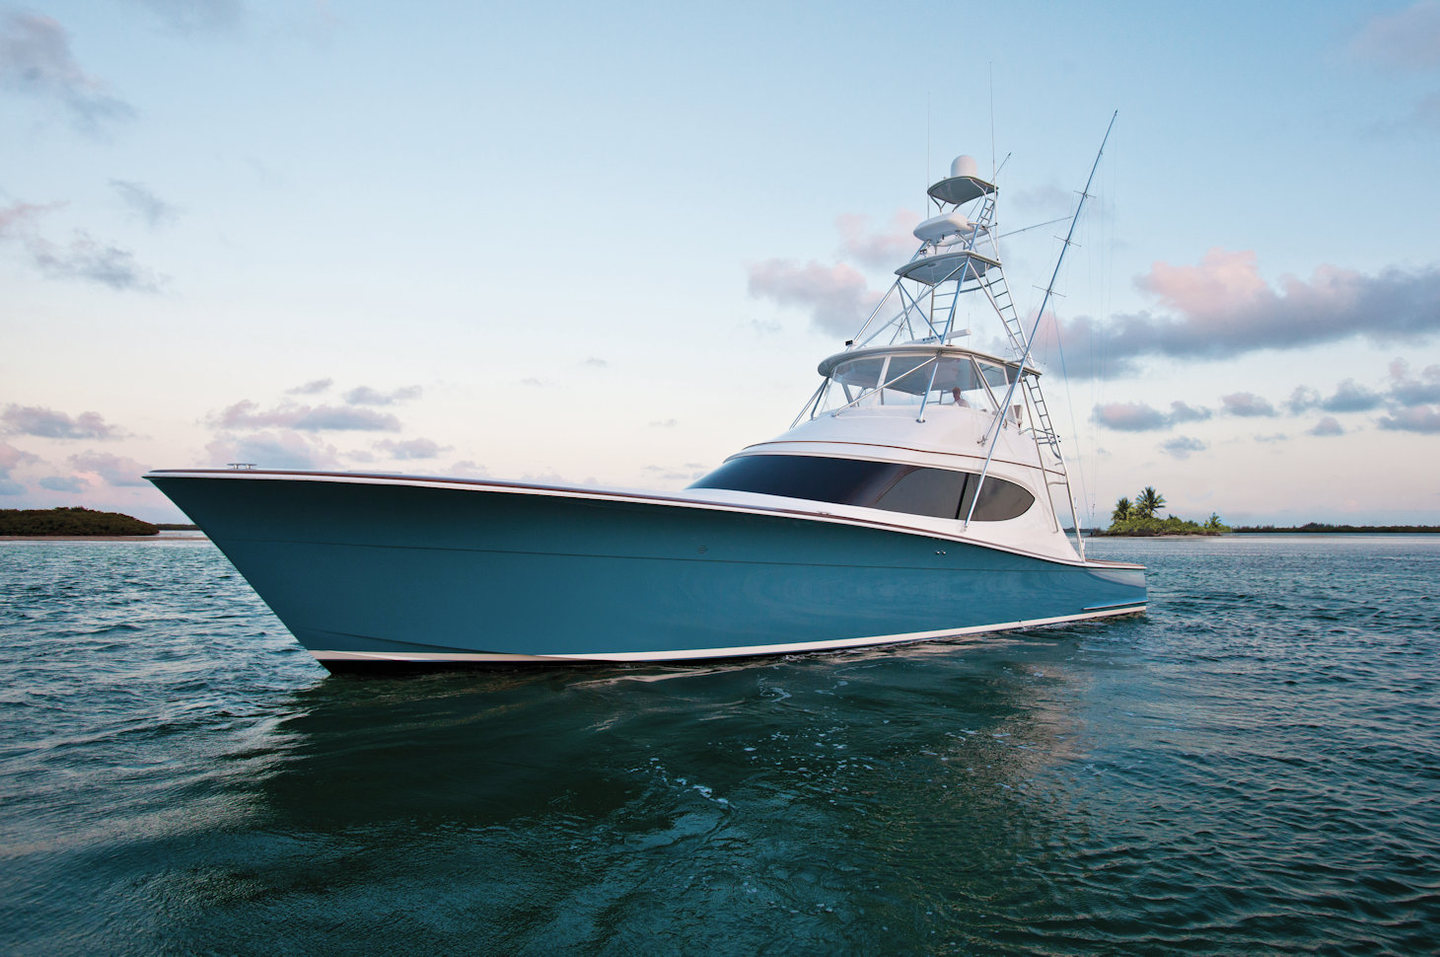 360 VR Virtual Tours of the Hatteras GT63